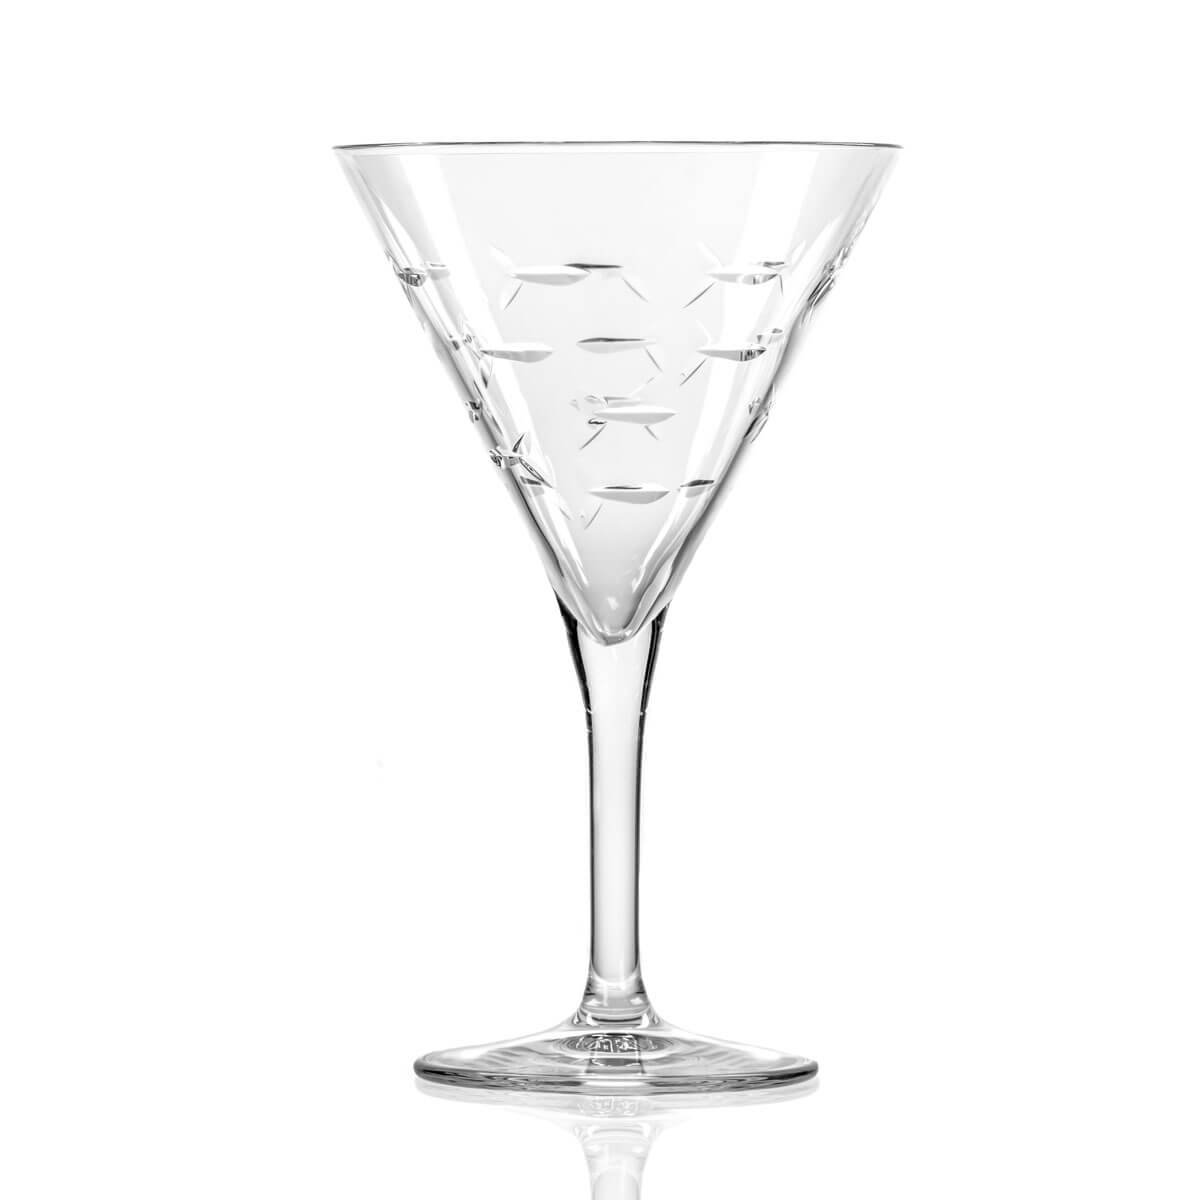 9031 - School of Fish Martini Glass (4 qty) - $18/each - 4 Purchased